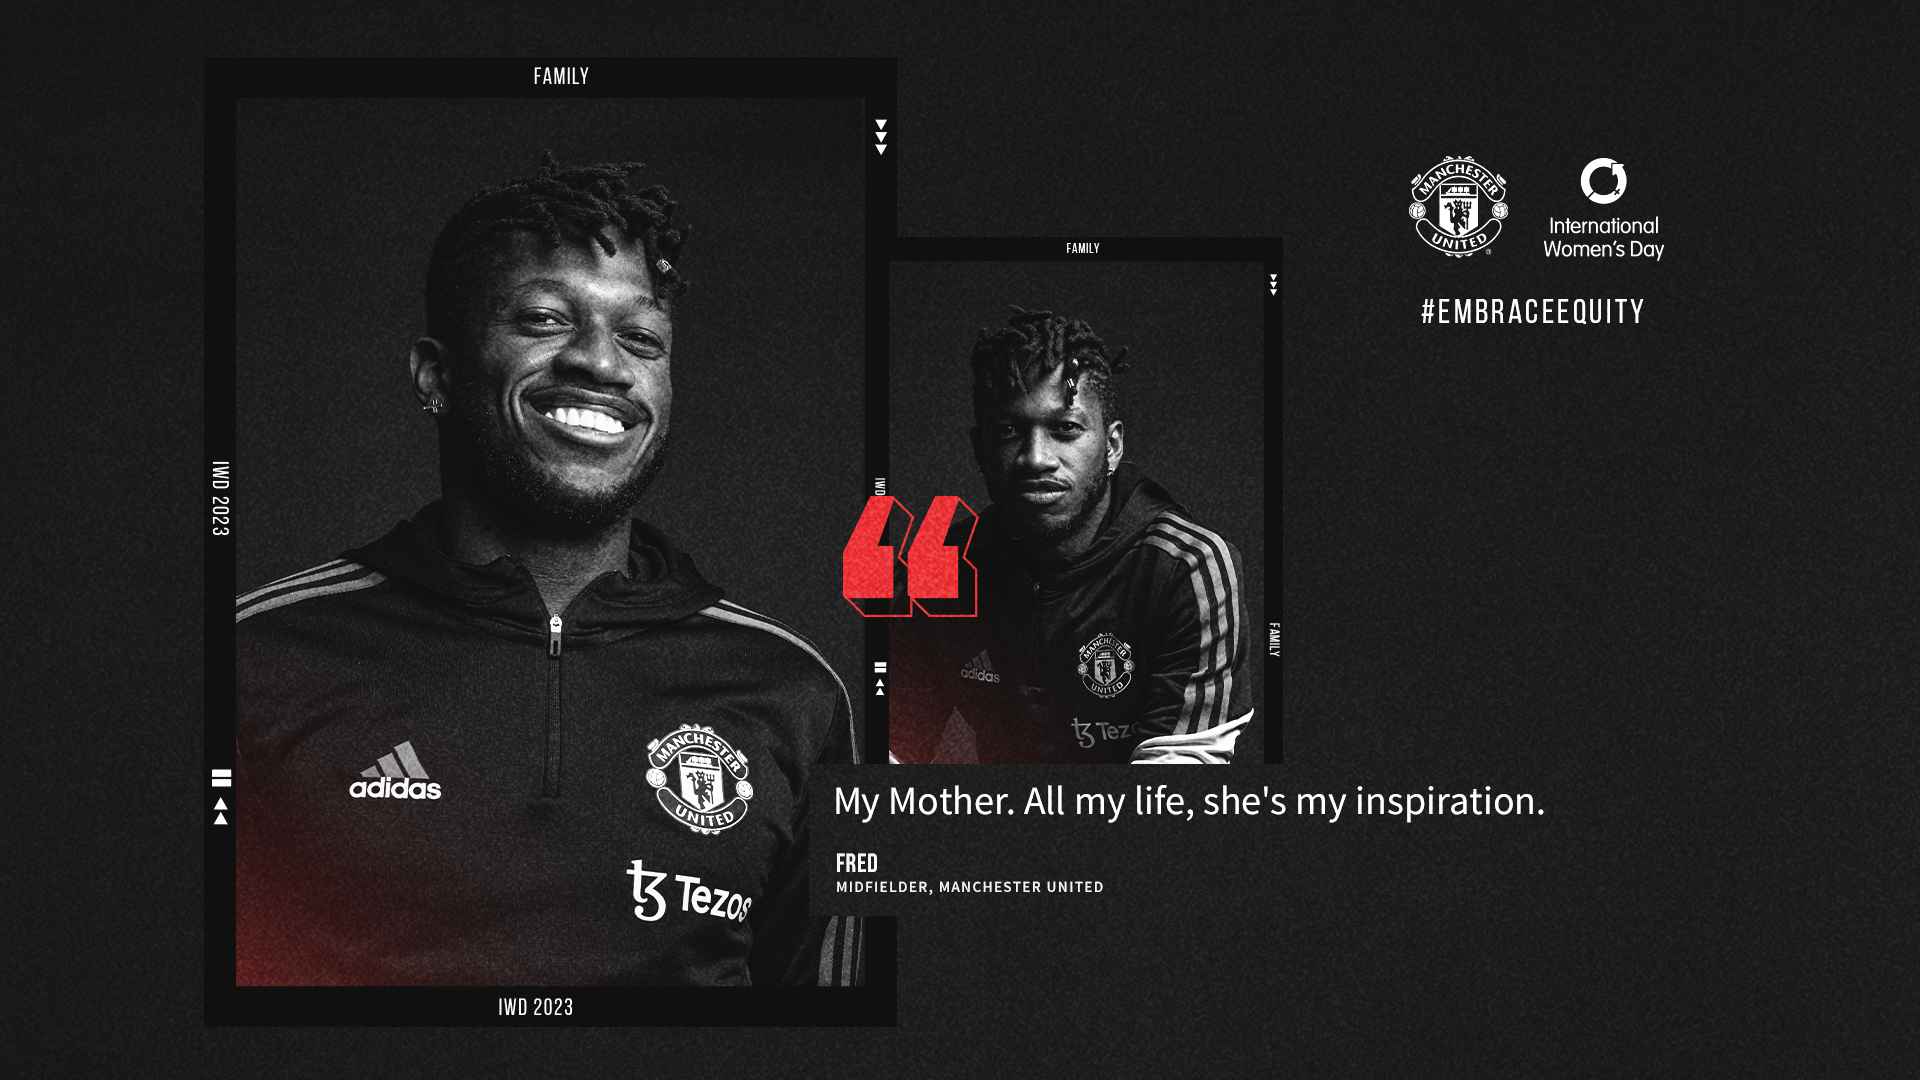 Manchester United women's role model